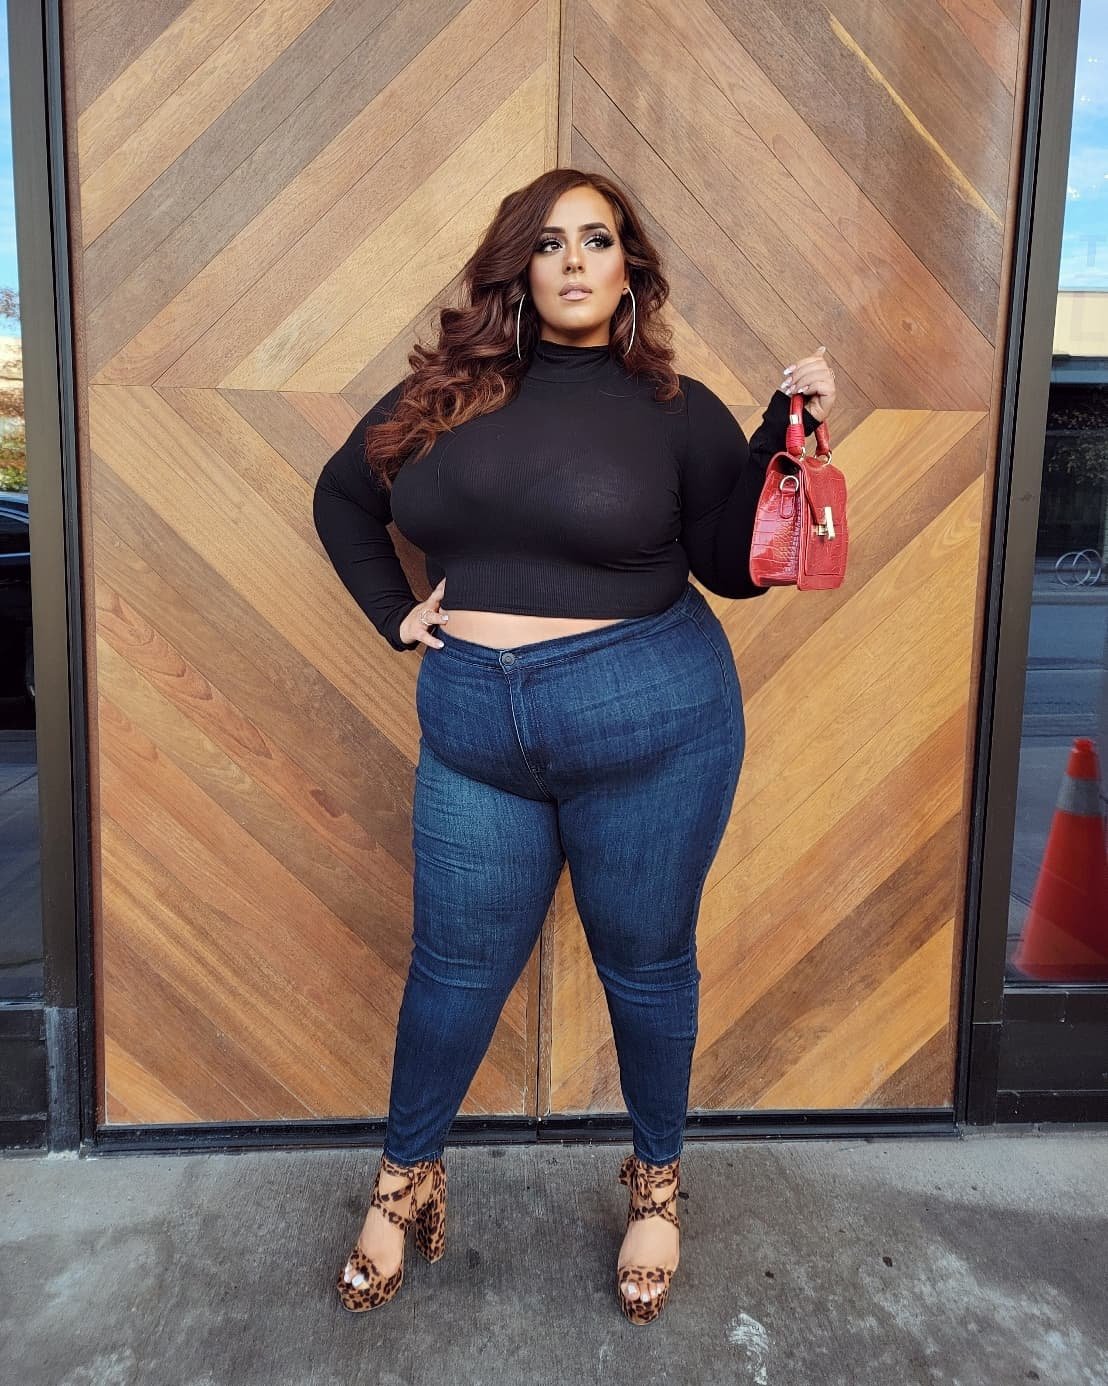 plus-size-influencer-olivia-shows-toronto-how-to-be-sexy-and